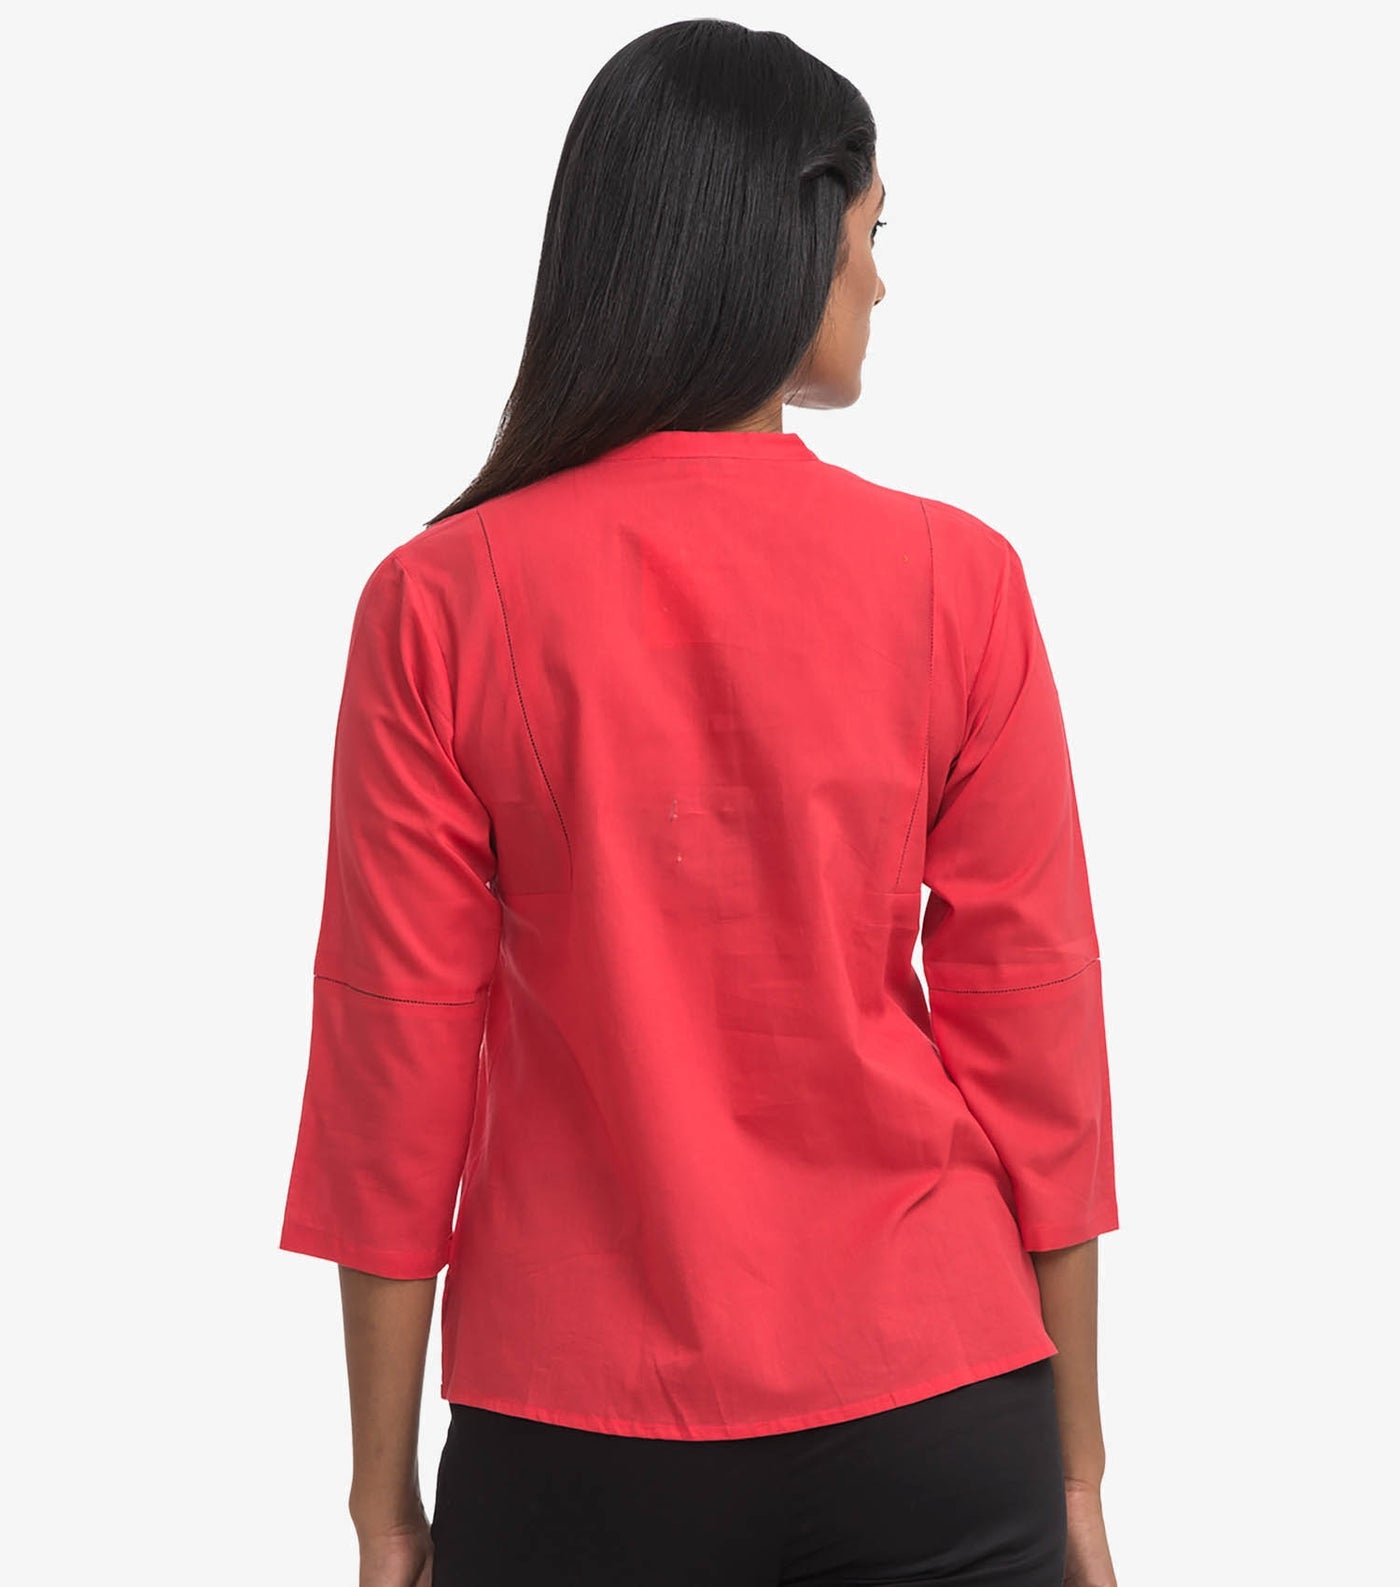 Coral cotton solid top